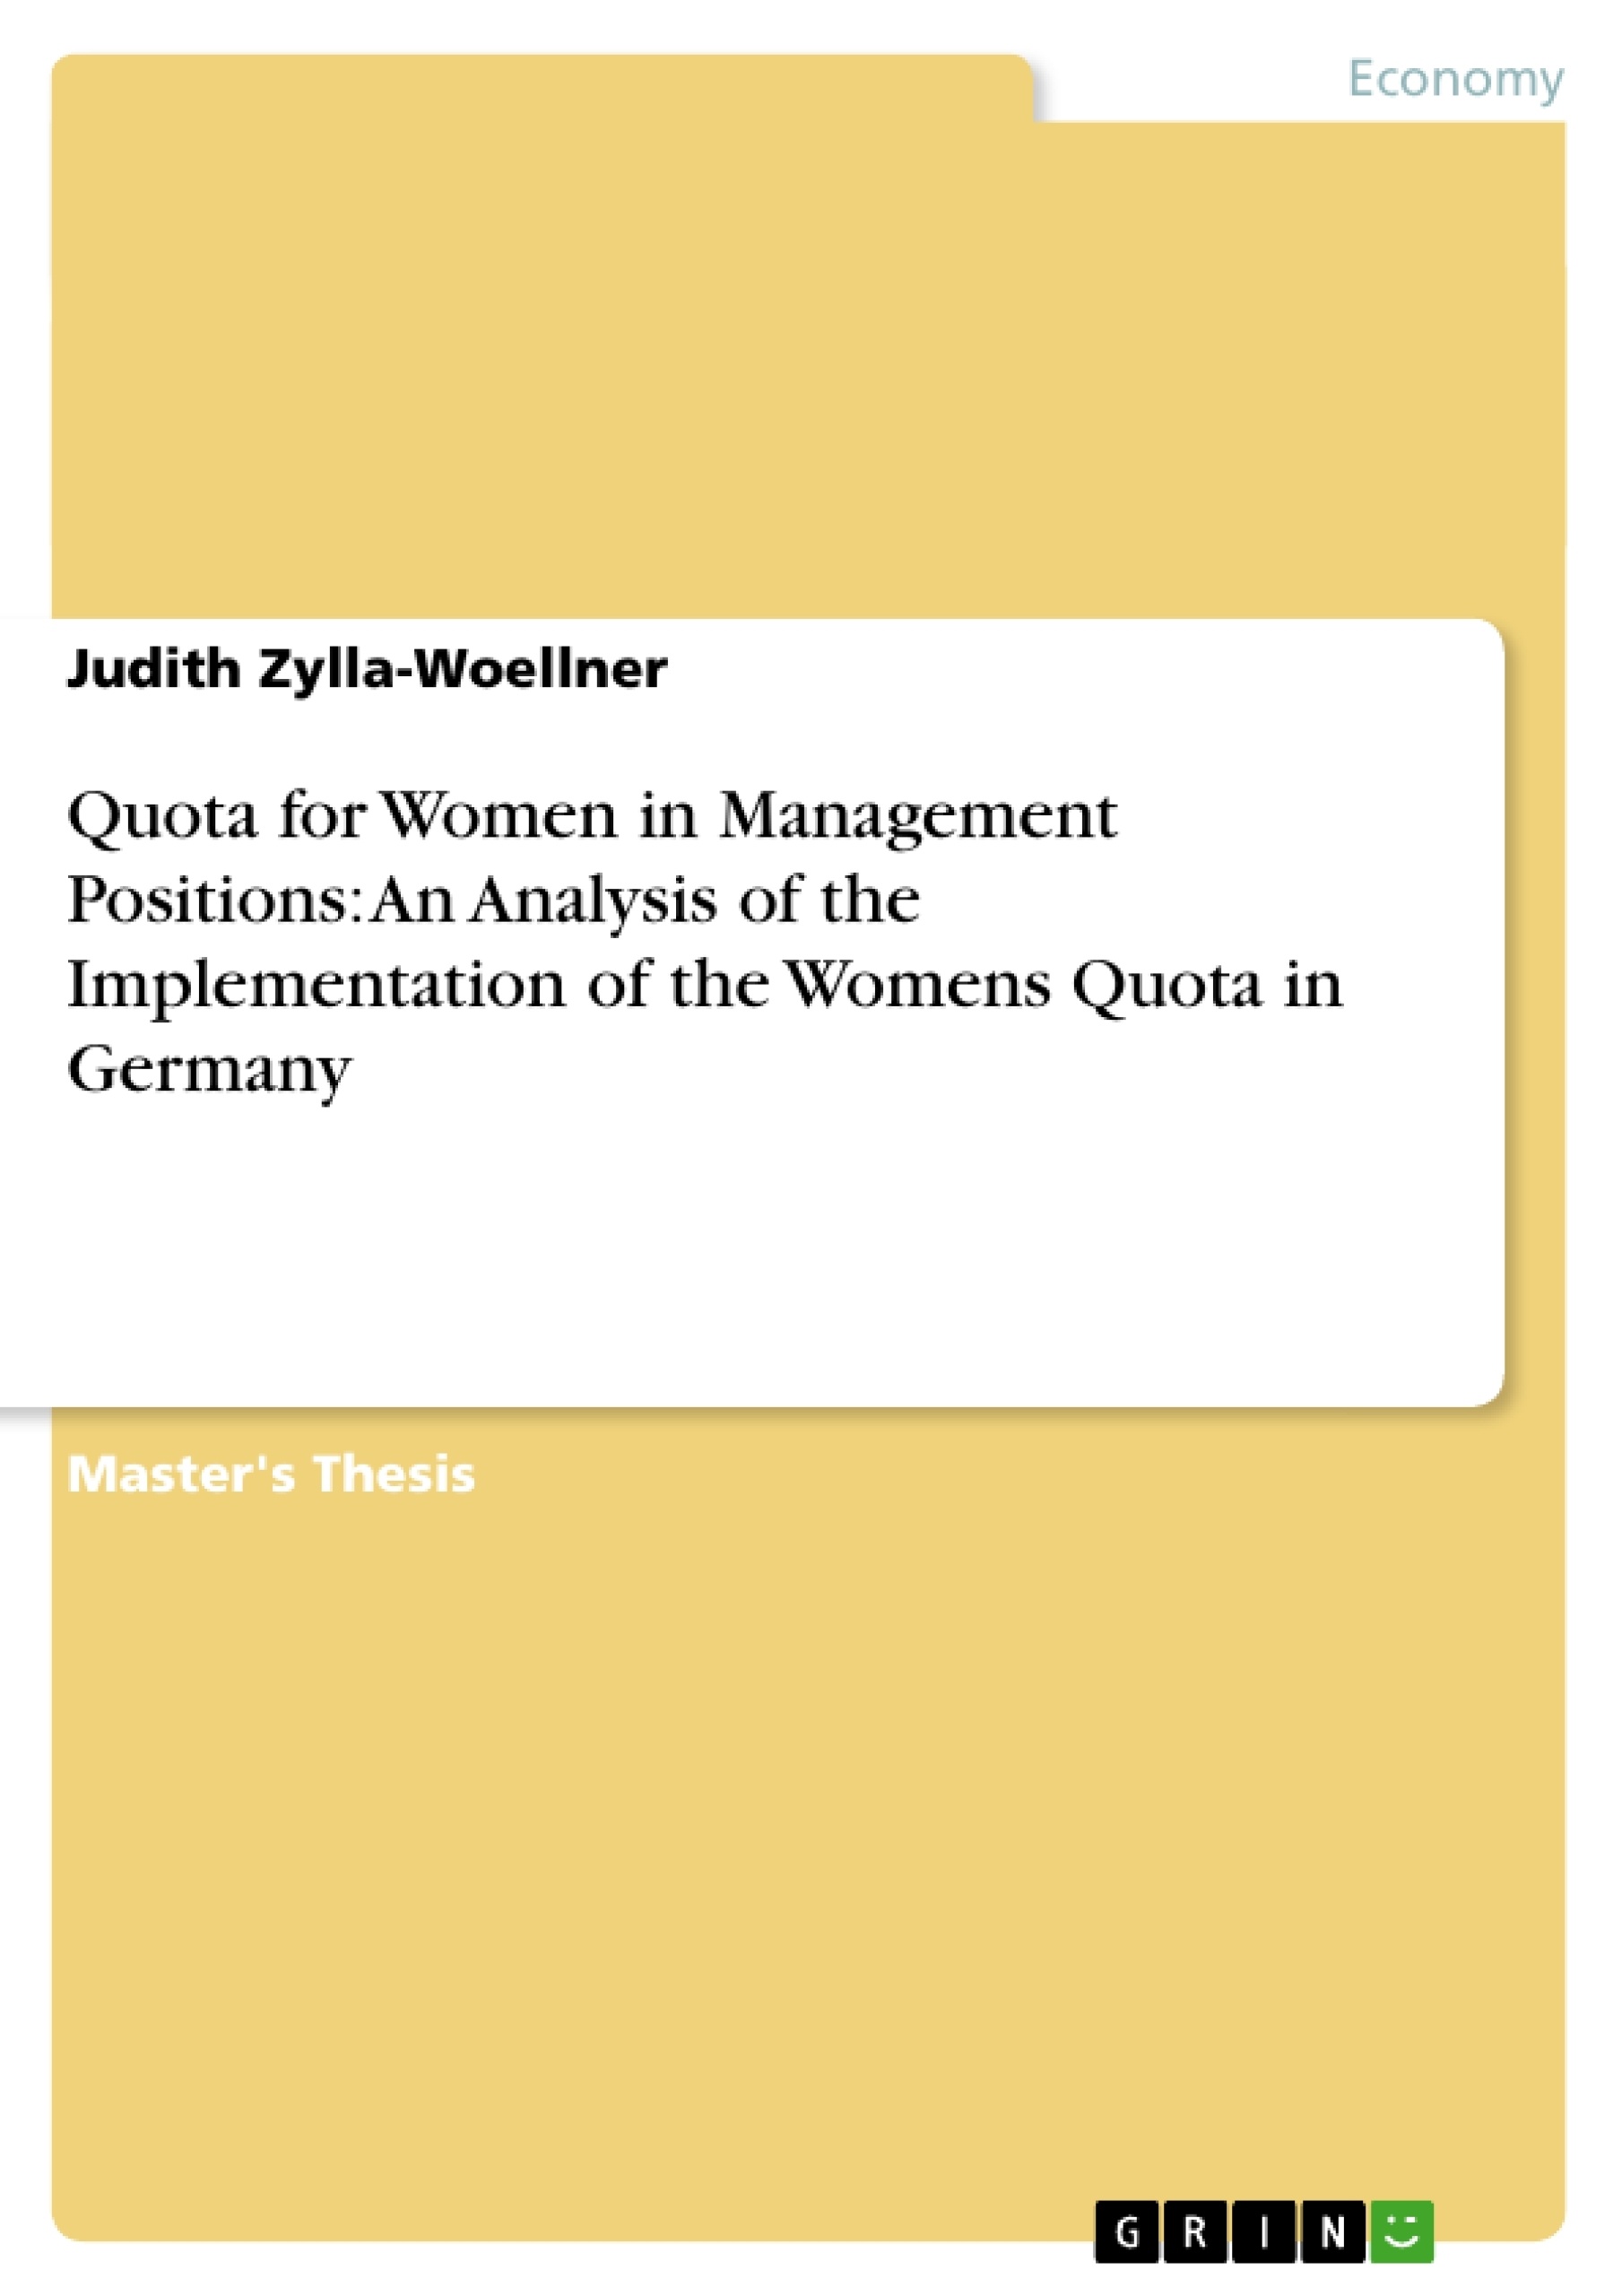 Title: Quota for Women in Management Positions: An Analysis of the Implementation of the Womens Quota in Germany